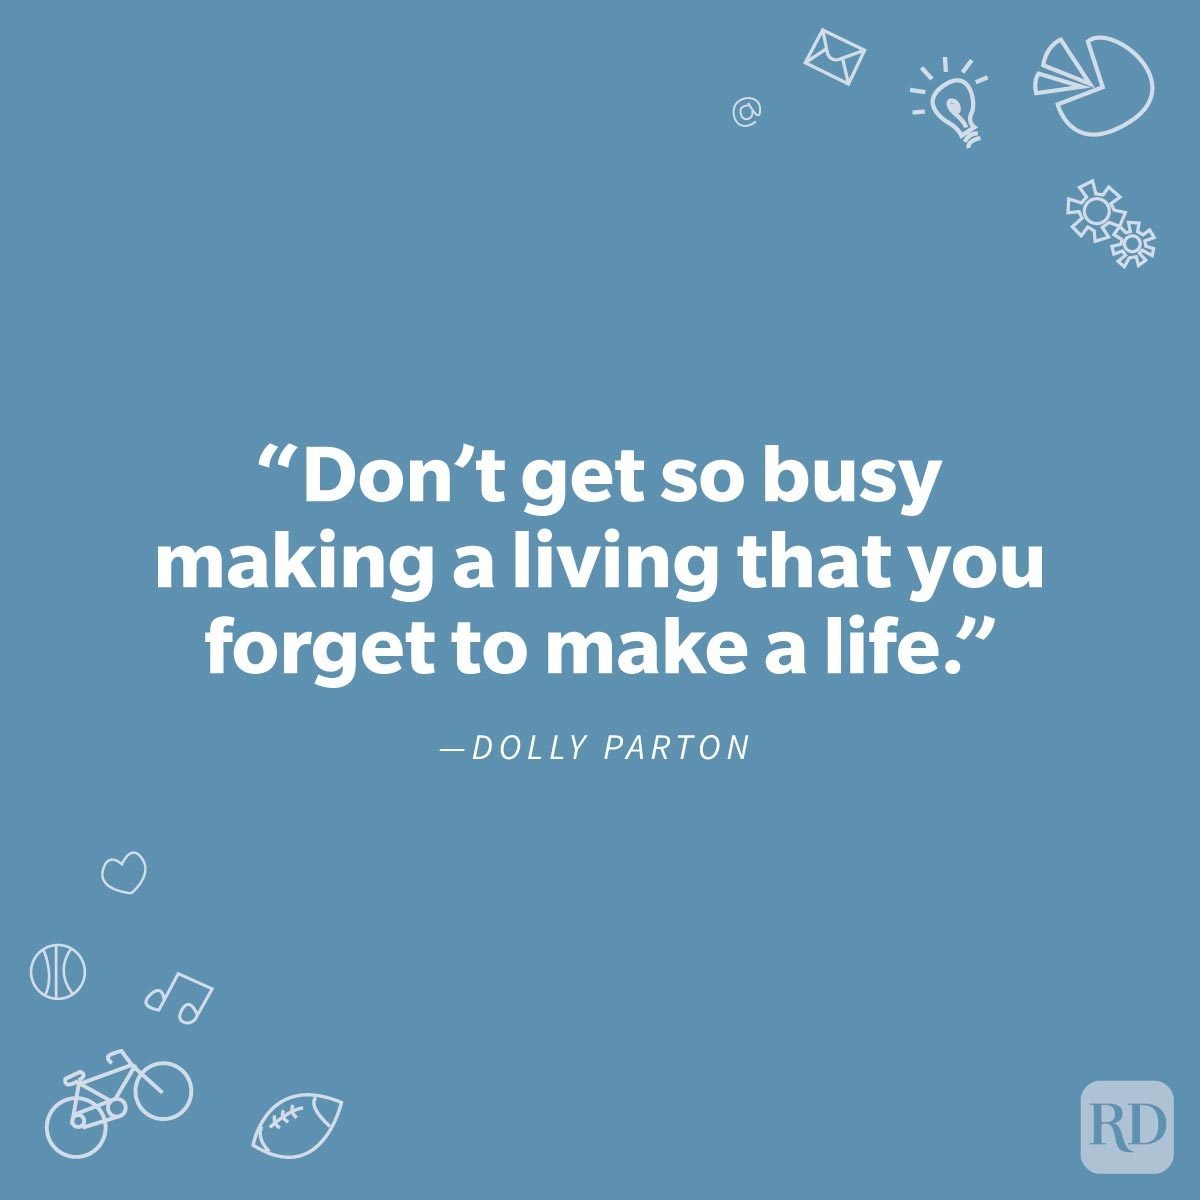 Quote about work-life balance by Dolly Parton on solid blue background